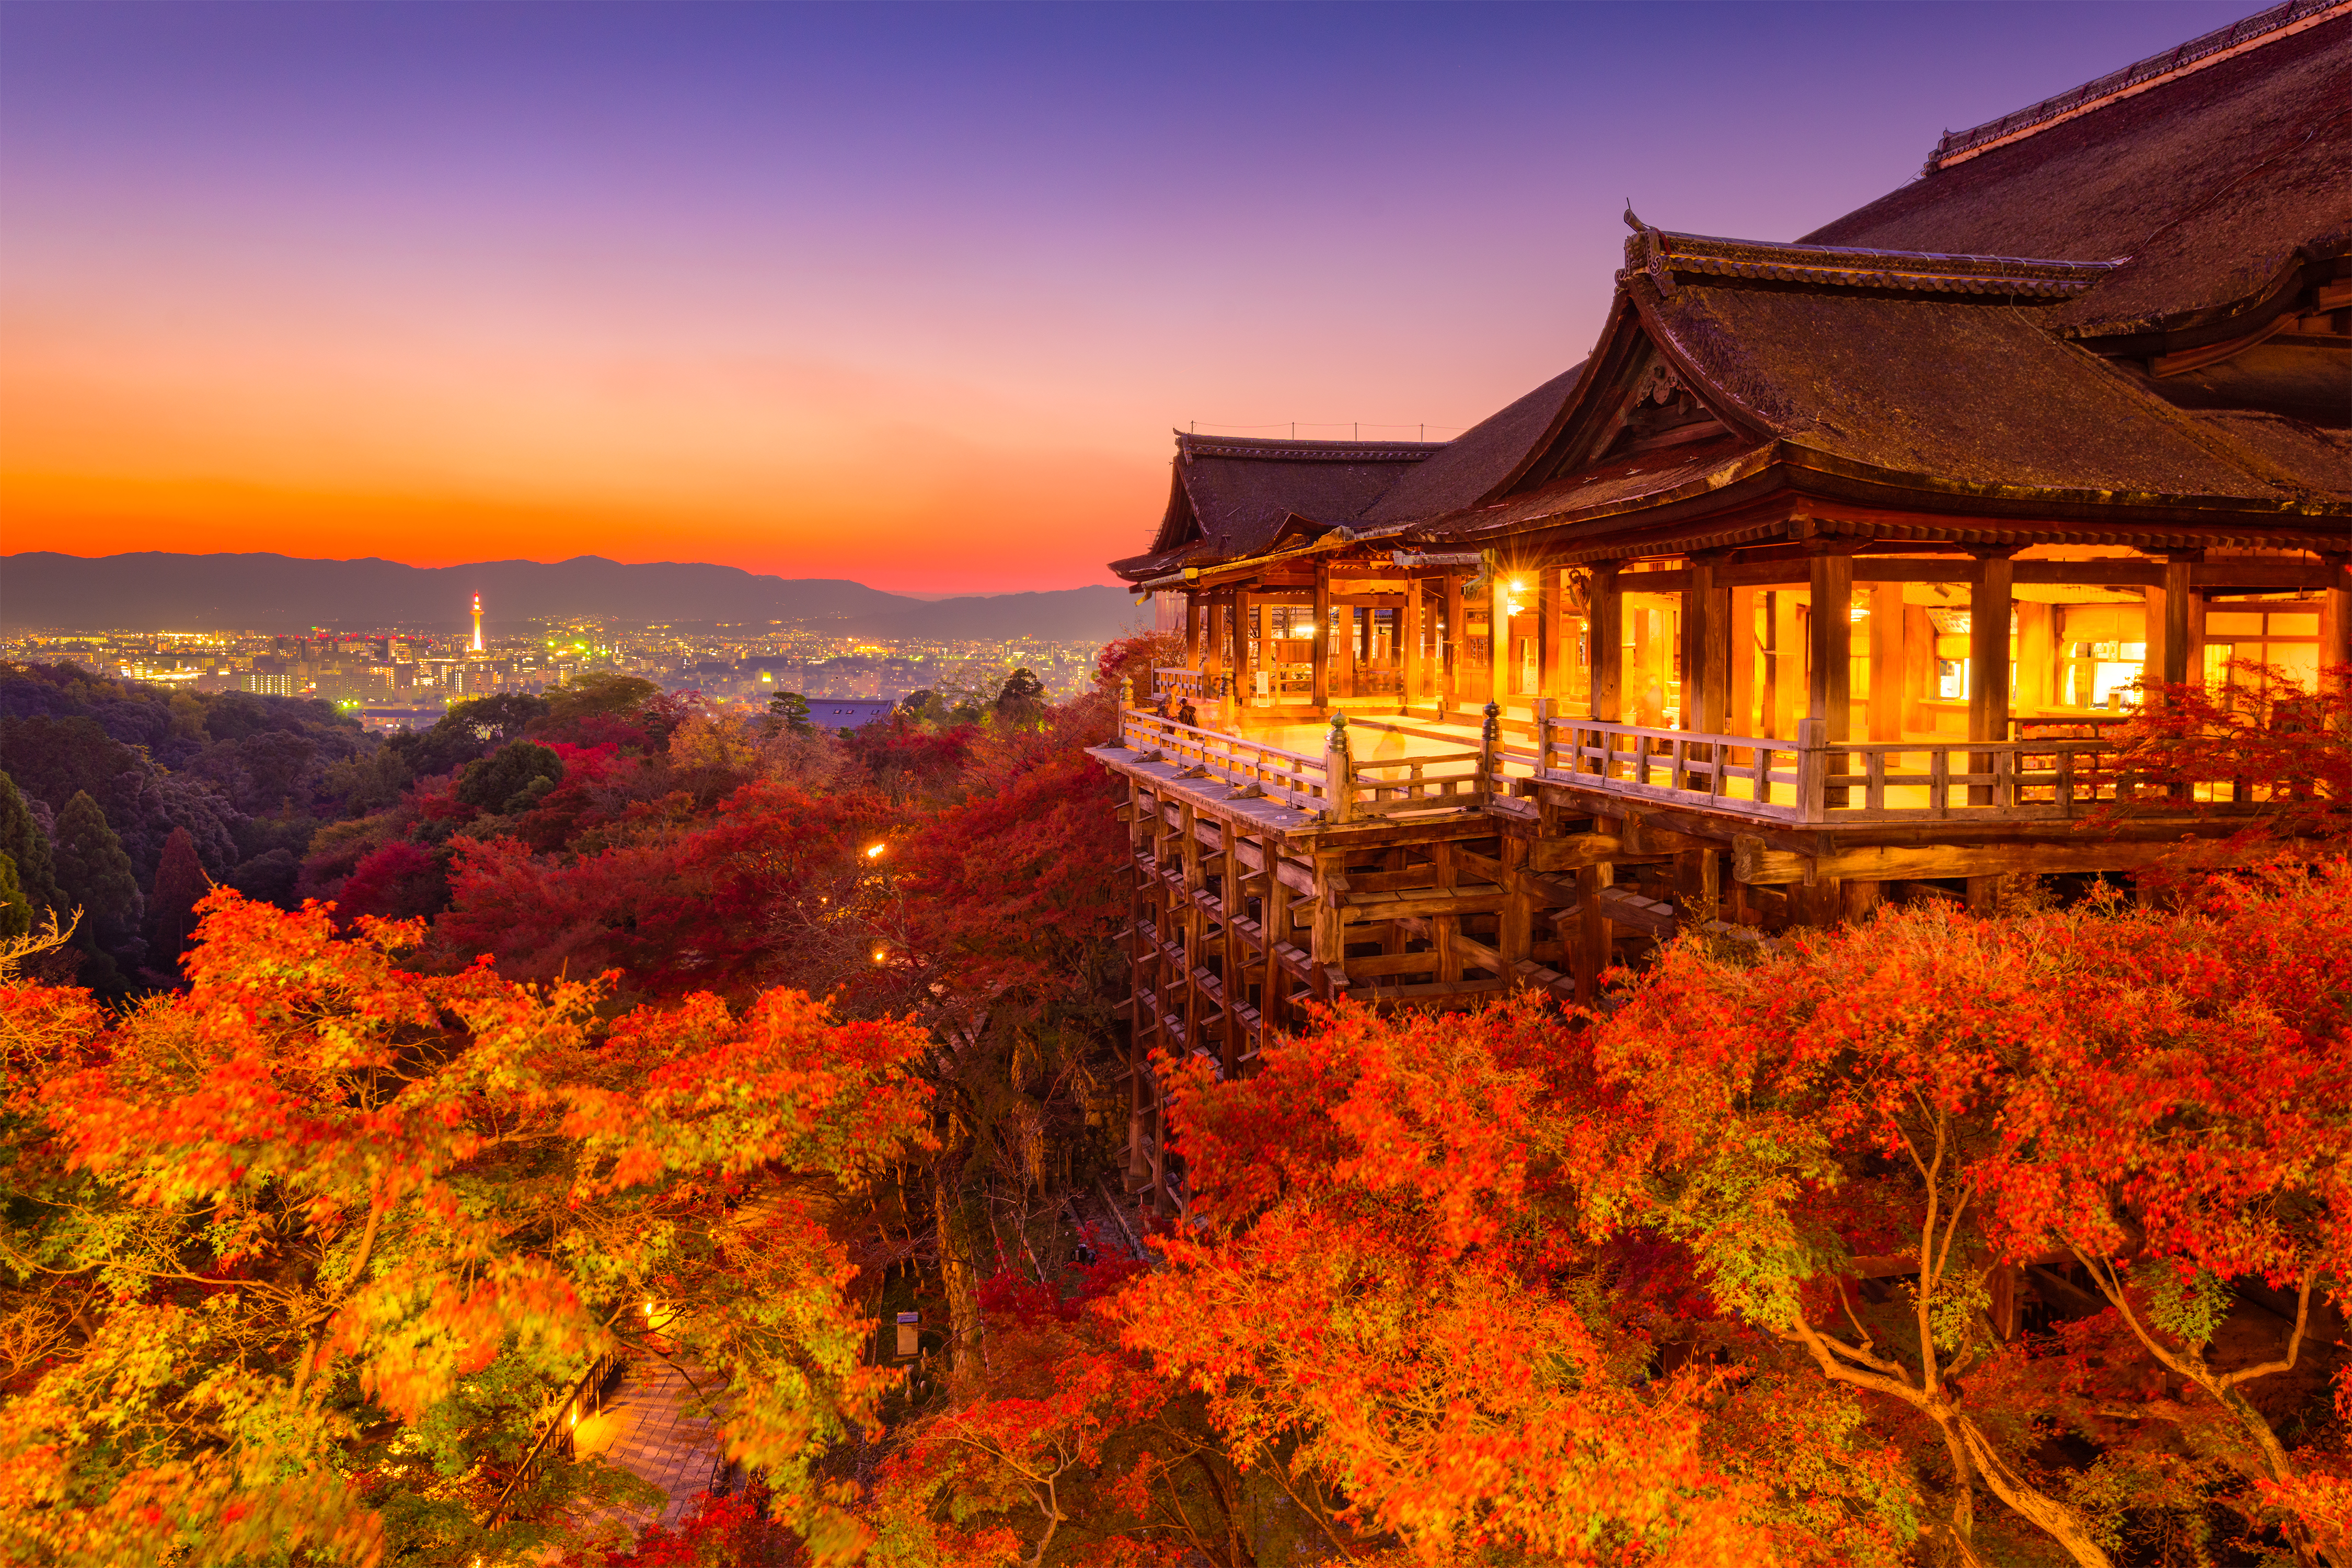 Kyoto Autumn Leaves Viewing Spots and Day Trip Ideas